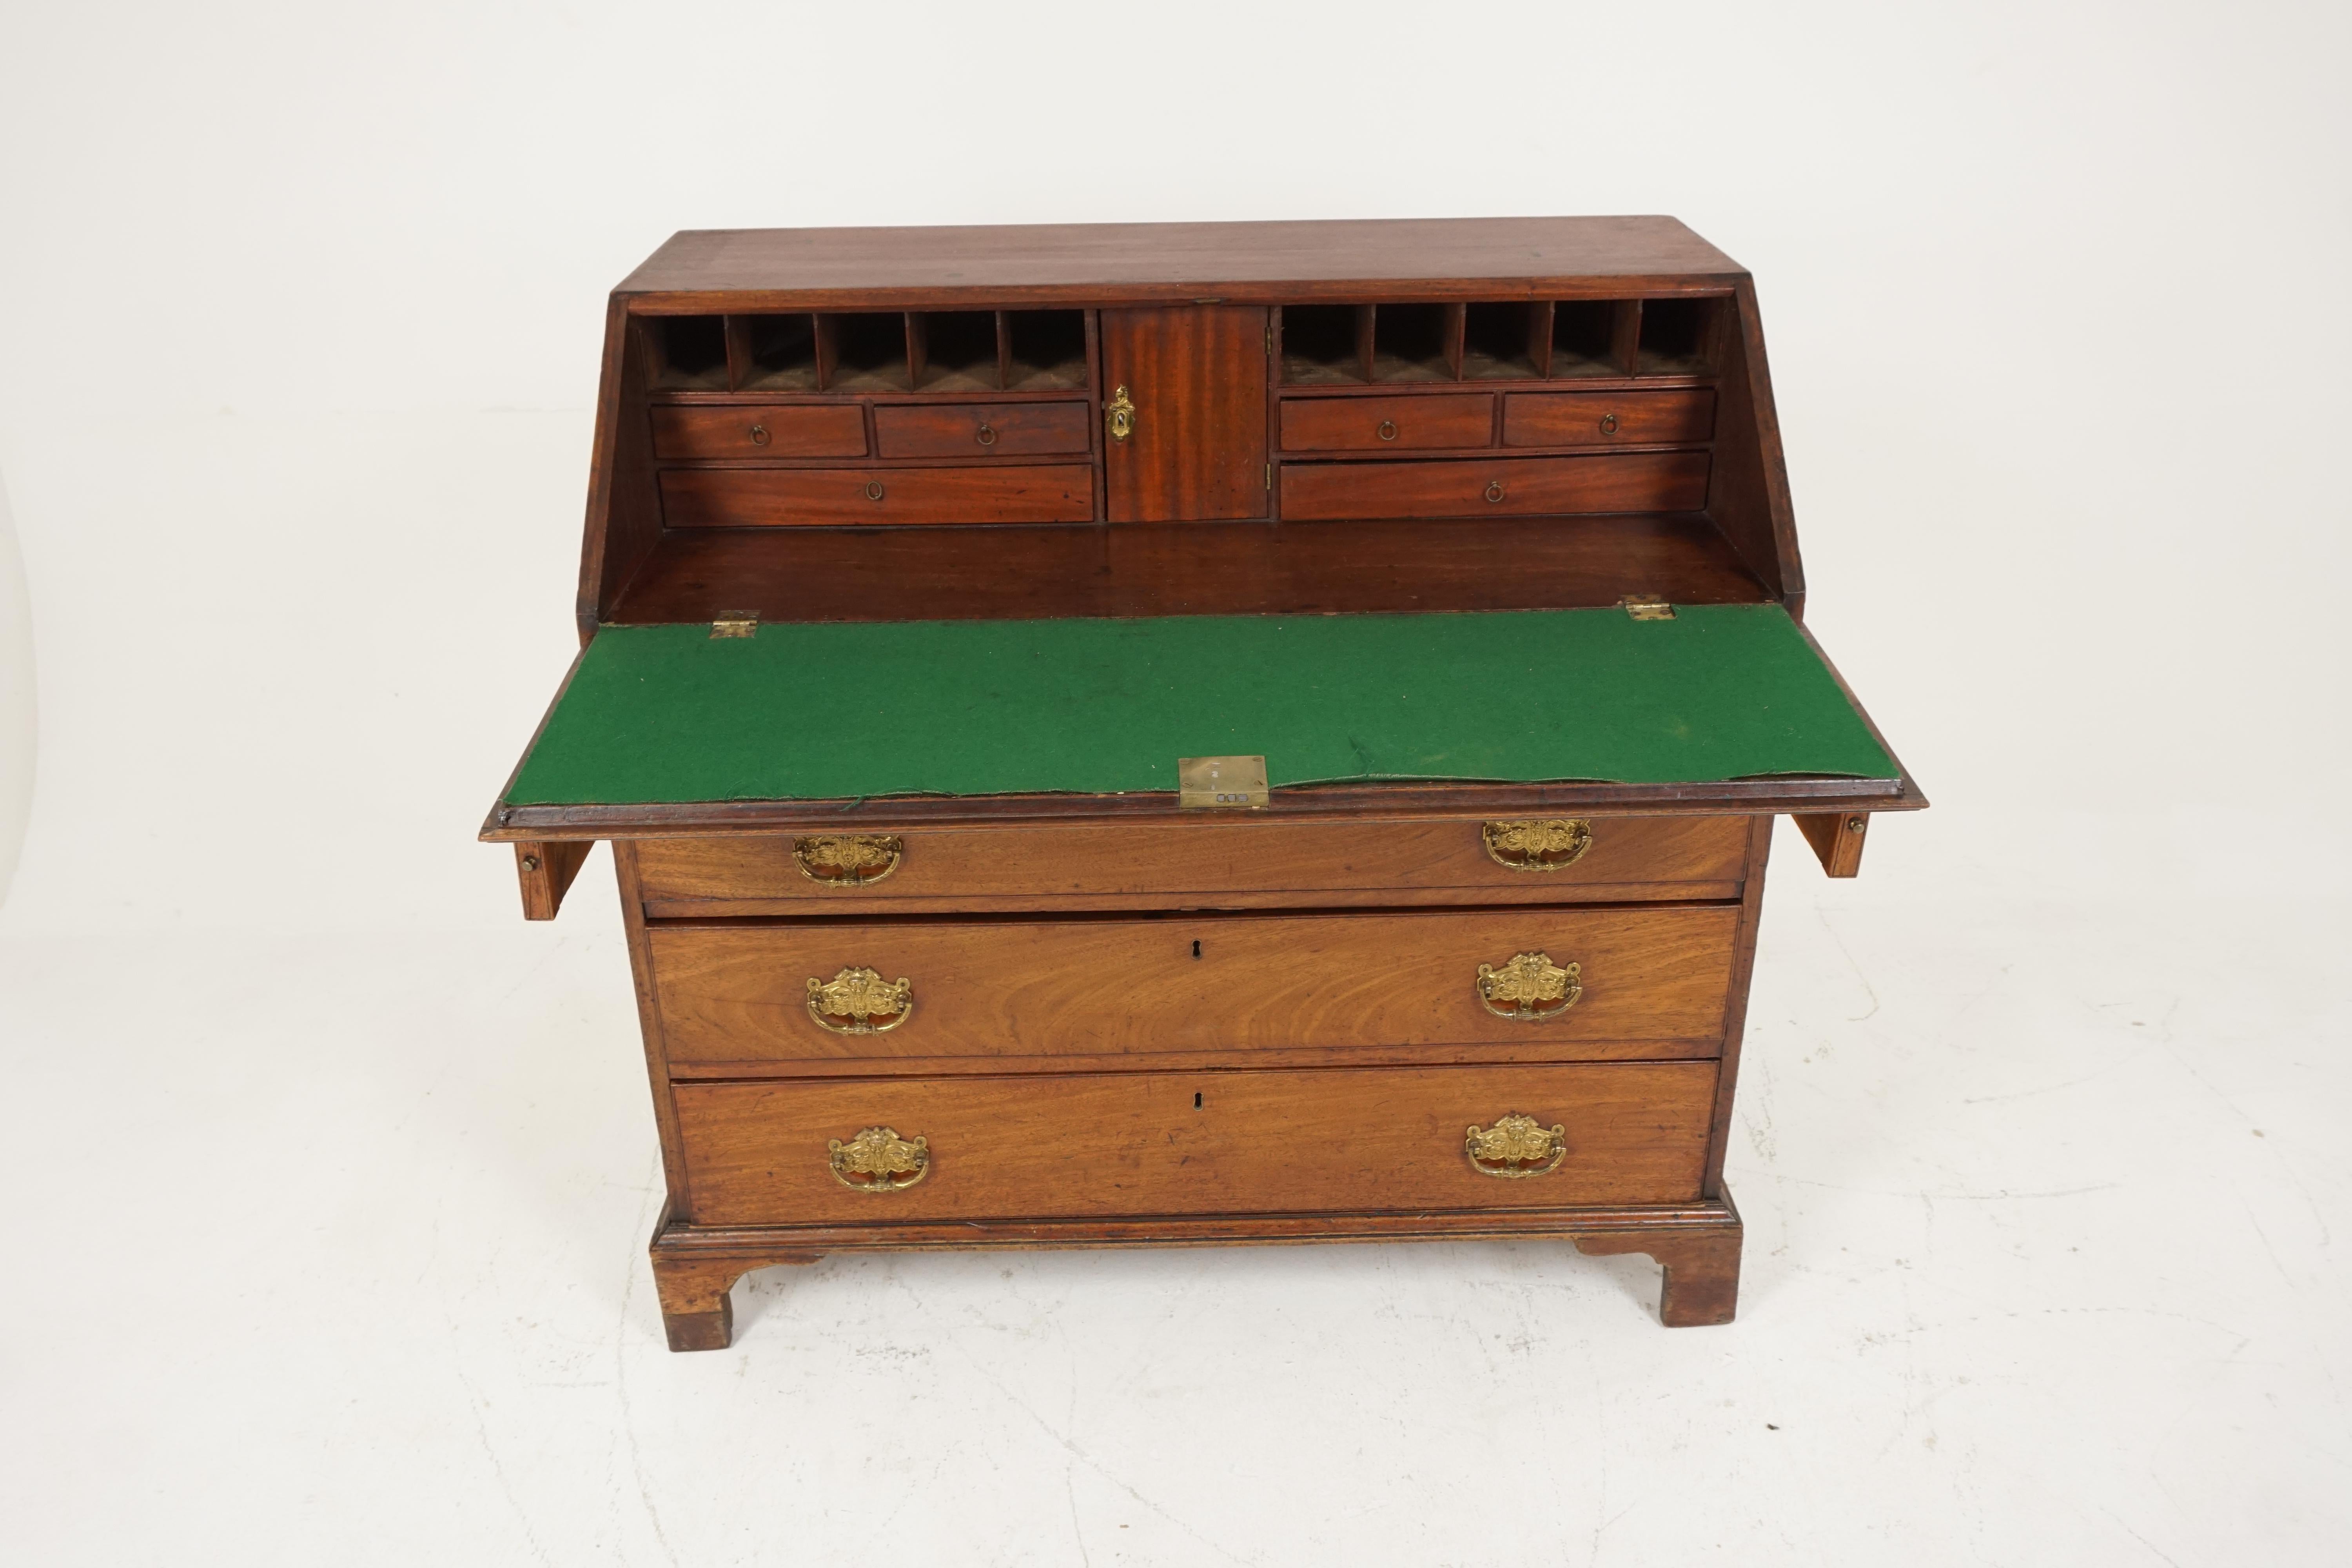 Antique Georgian walnut slant front desk, bureau, Scotland 1810, H528

Scotland 1810
Solid walnut
Original finish
With pigeon holes and drawers
Enclosed by a fall front lid
With four graduating dovetailed drawers
All standing on bracket feet
With